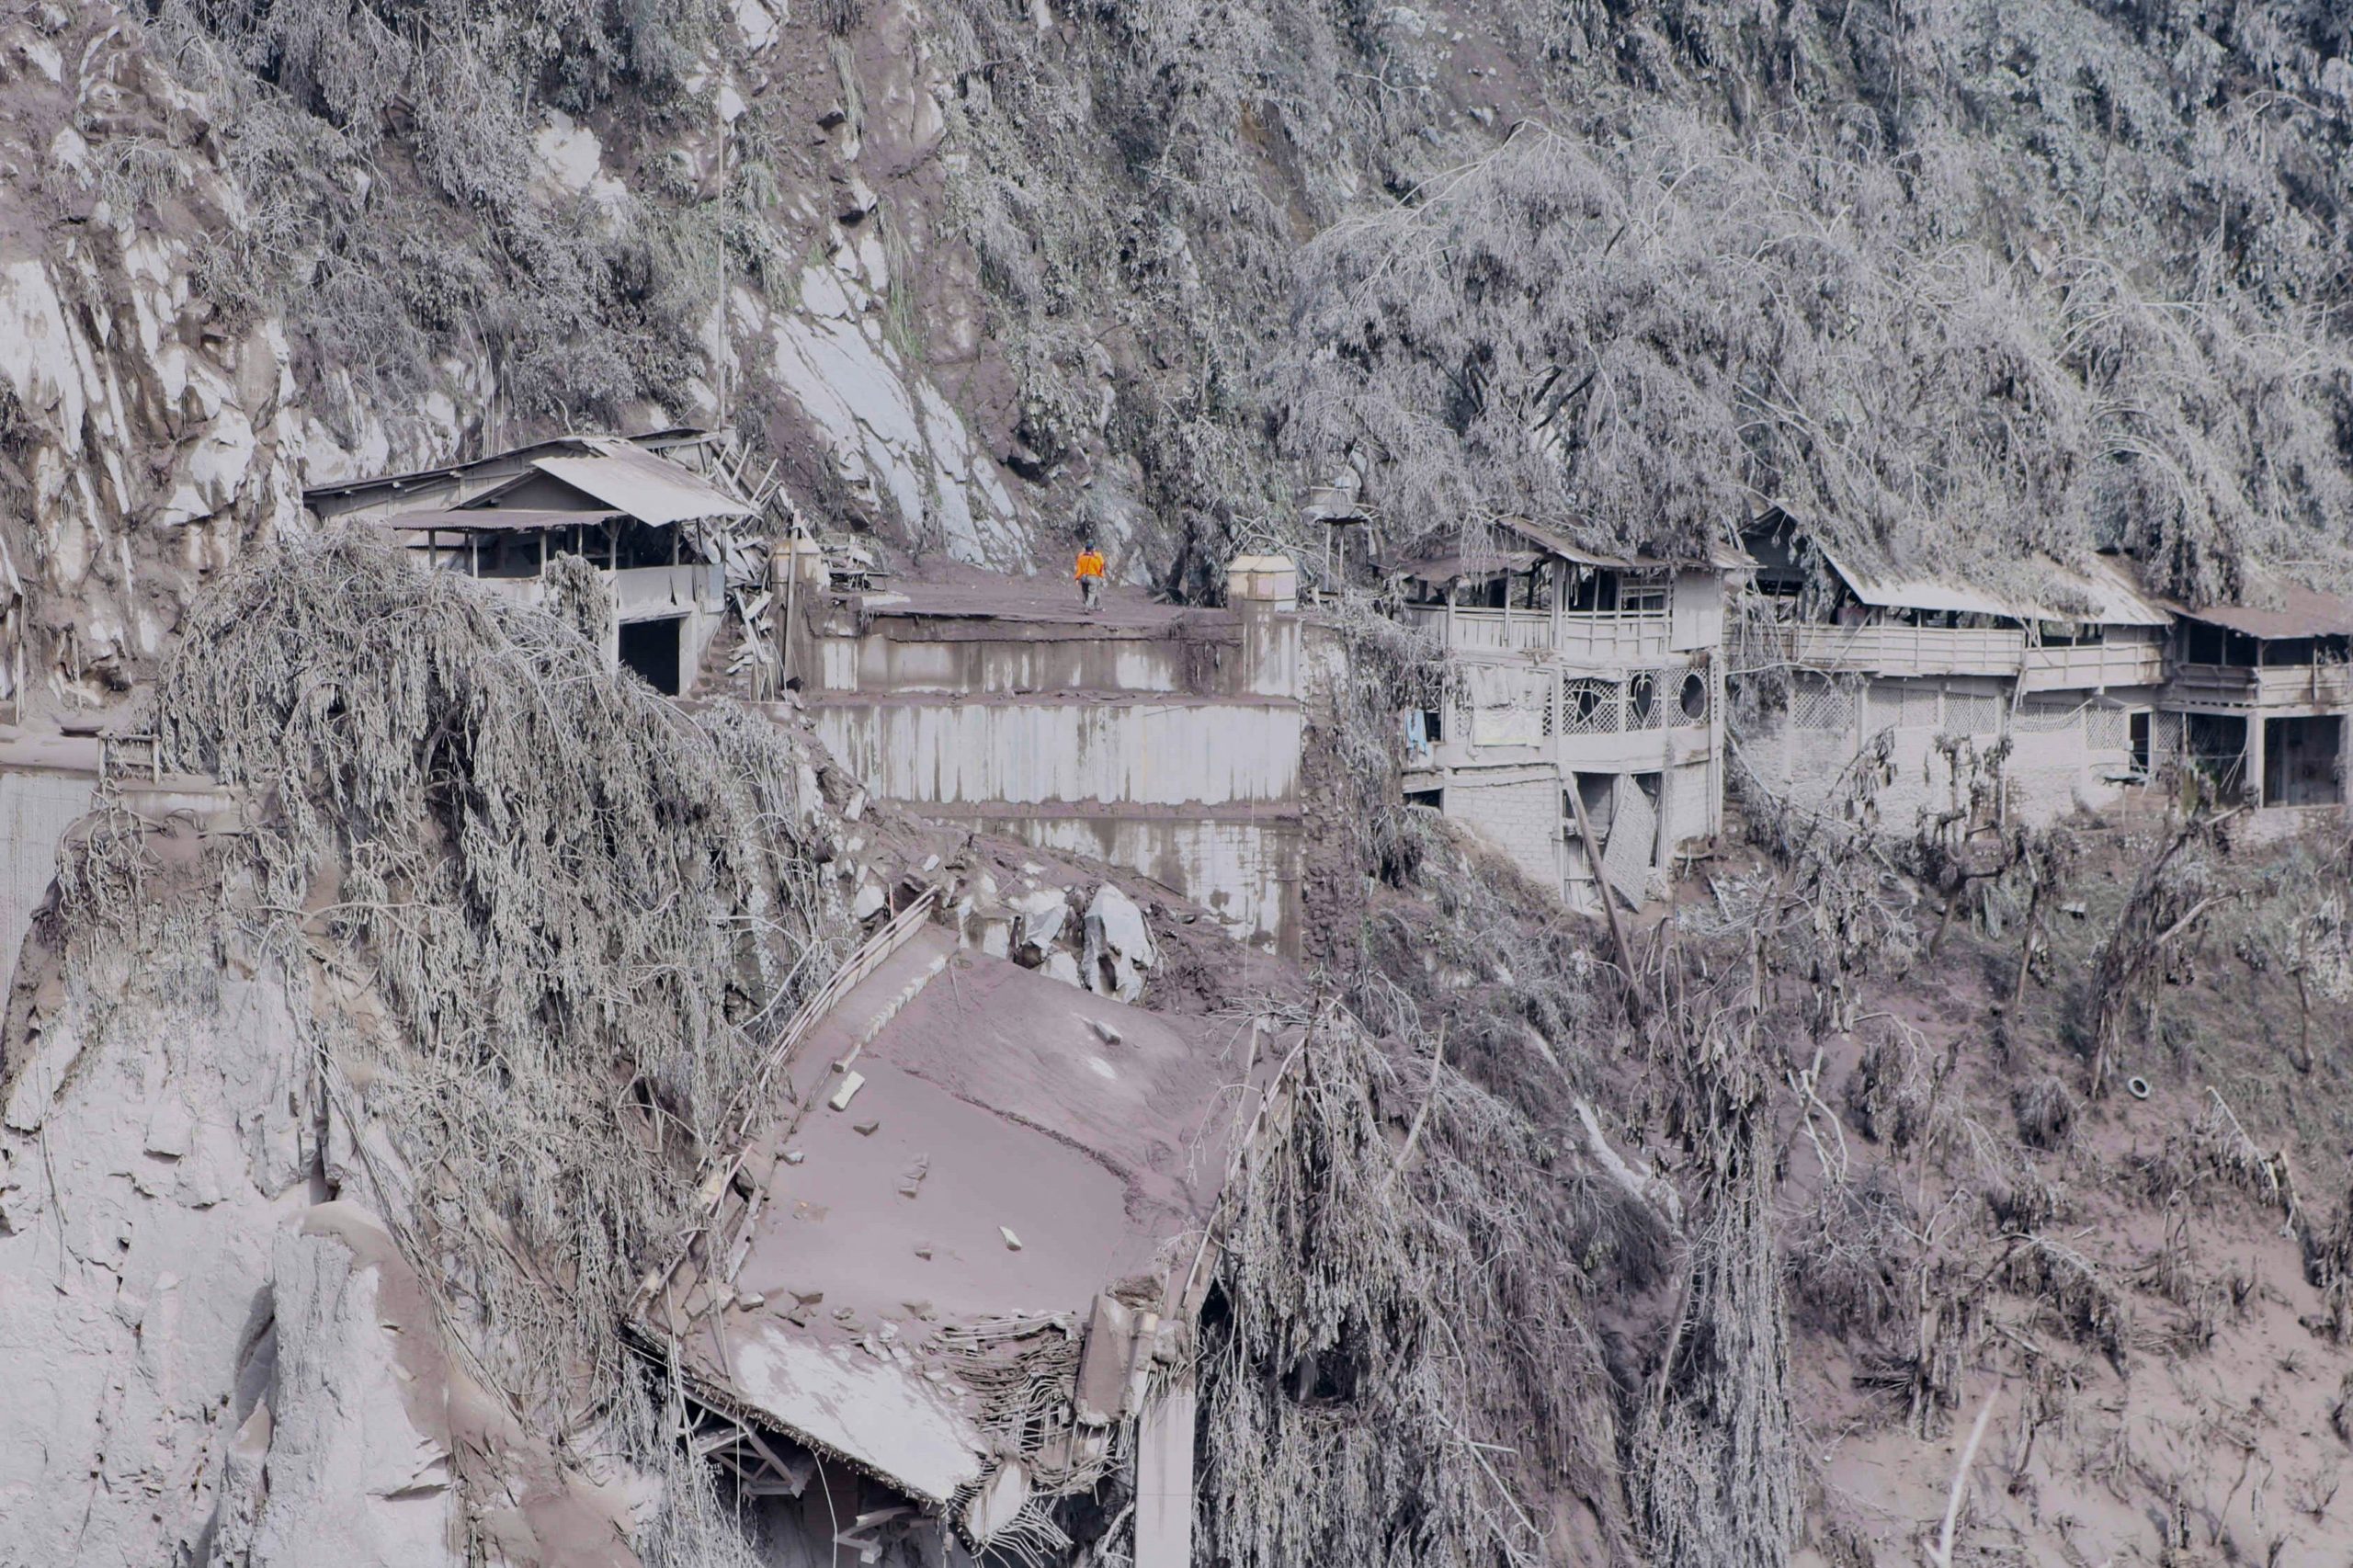 Ash covers houses and trees on the slopes of Mount Semeru in Lumajang. (Photo: Aman Rochman/AFP, Getty Images)